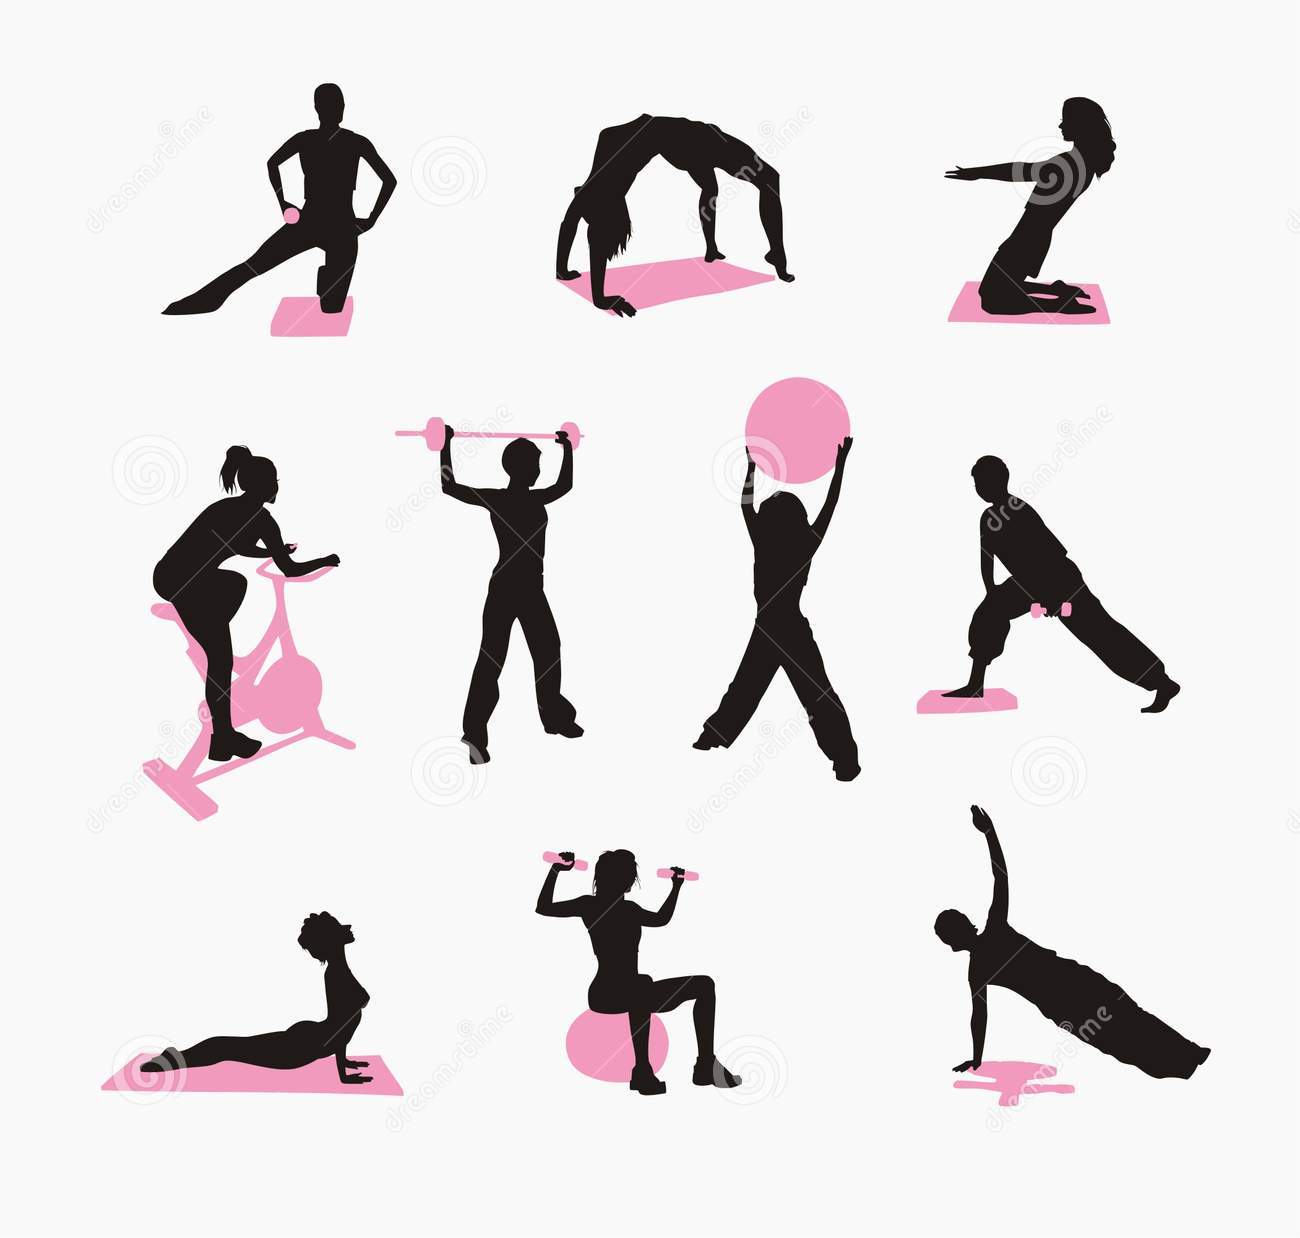 Exercise workout clip art. Exercising clipart fitness